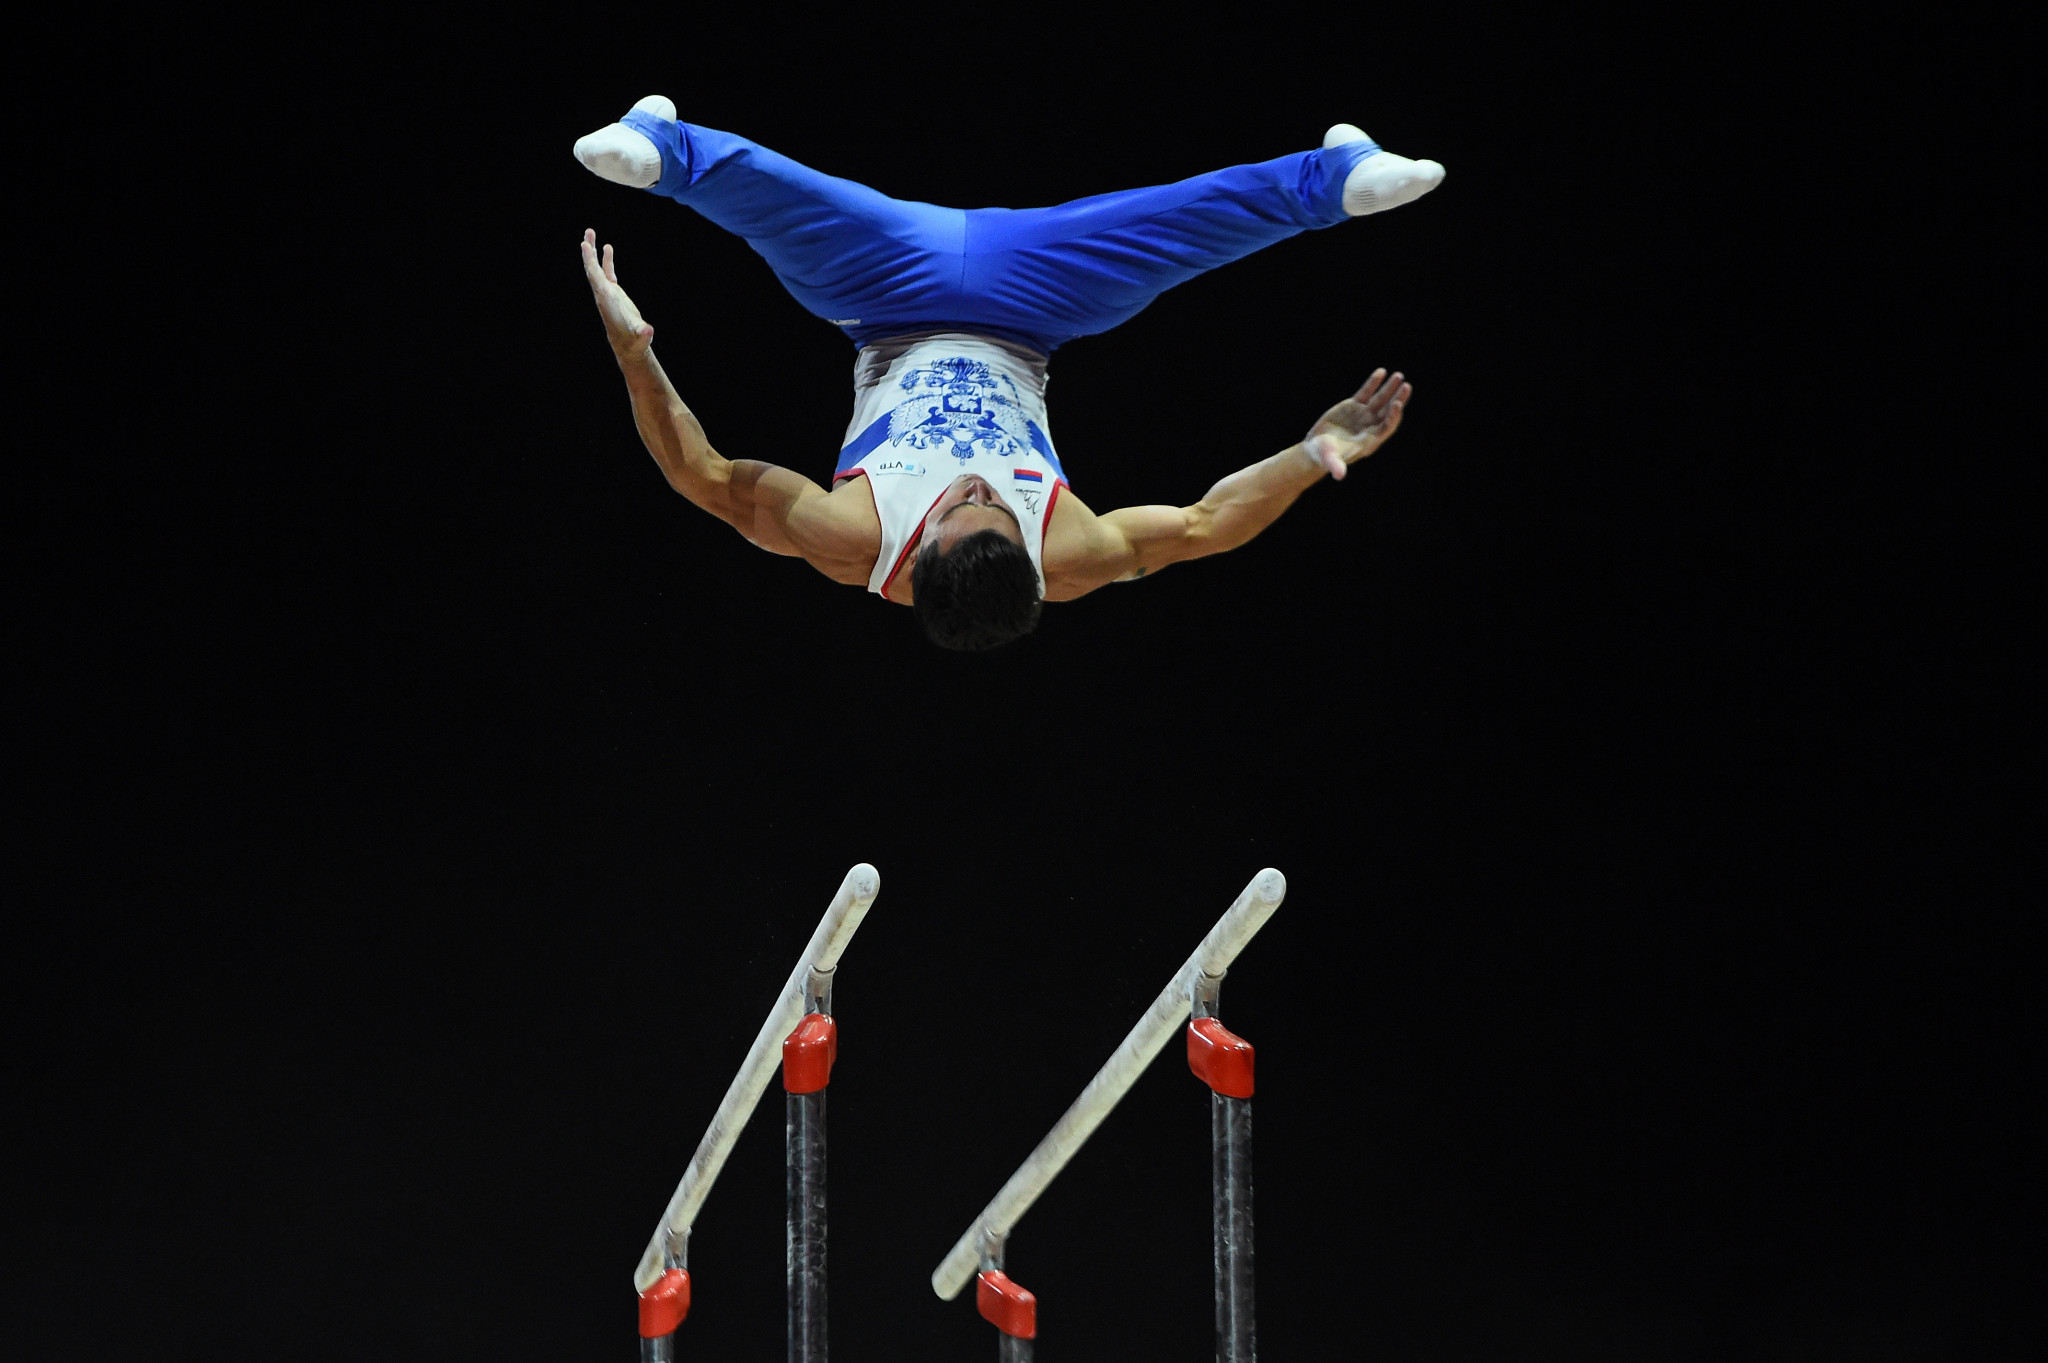 Before going onto clinch the men's parallel bars title ©Getty Images